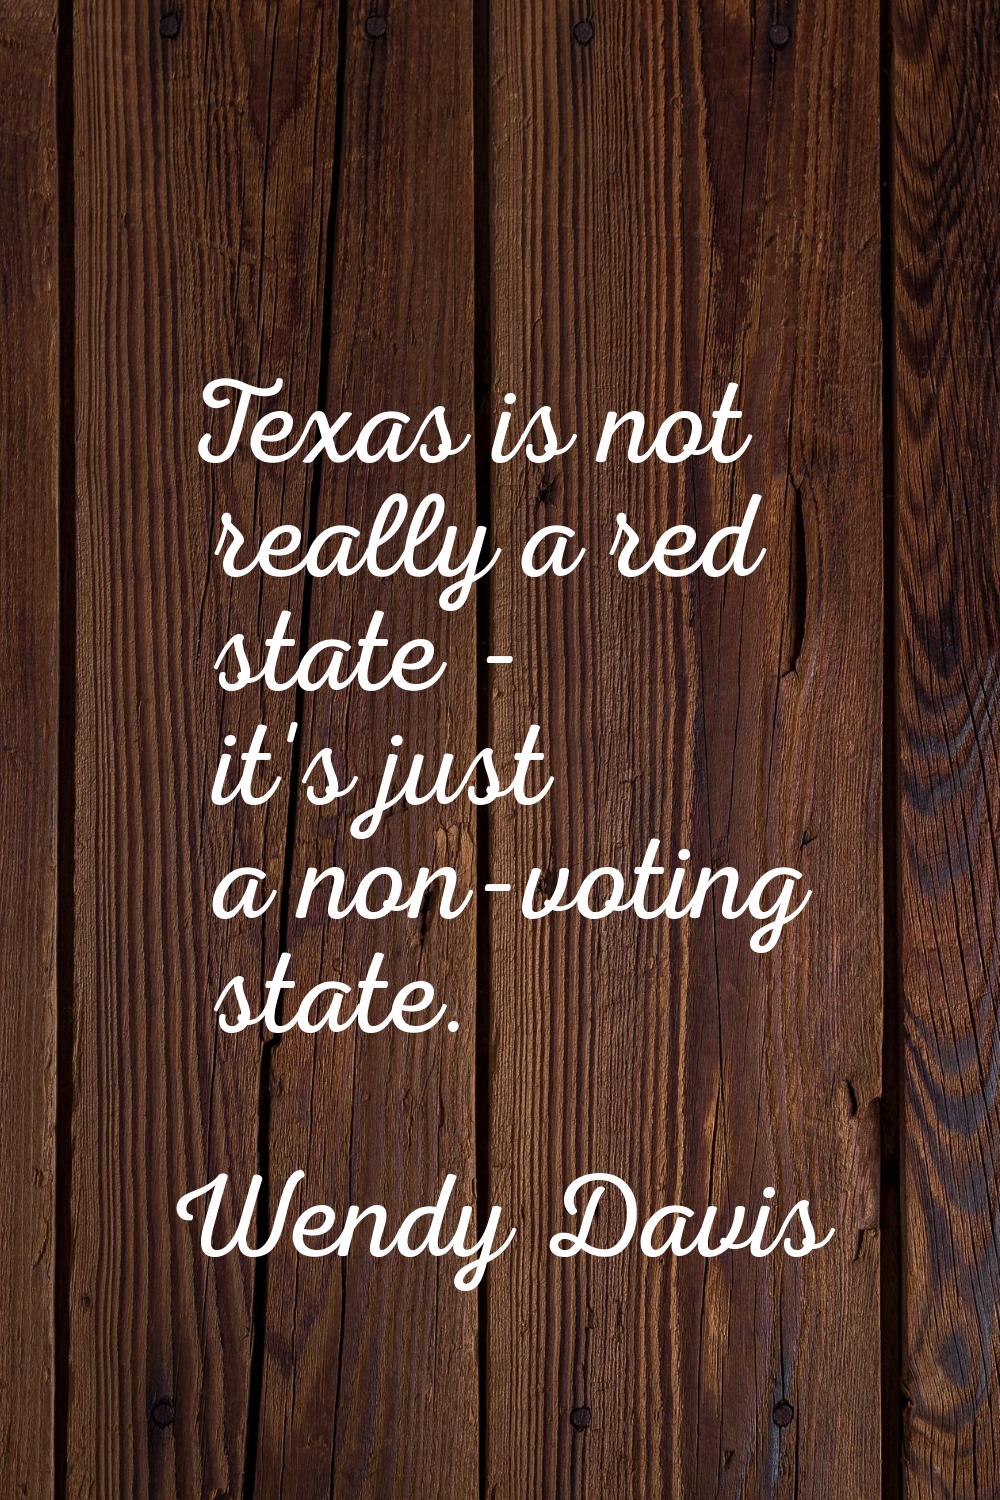 Texas is not really a red state - it's just a non-voting state.